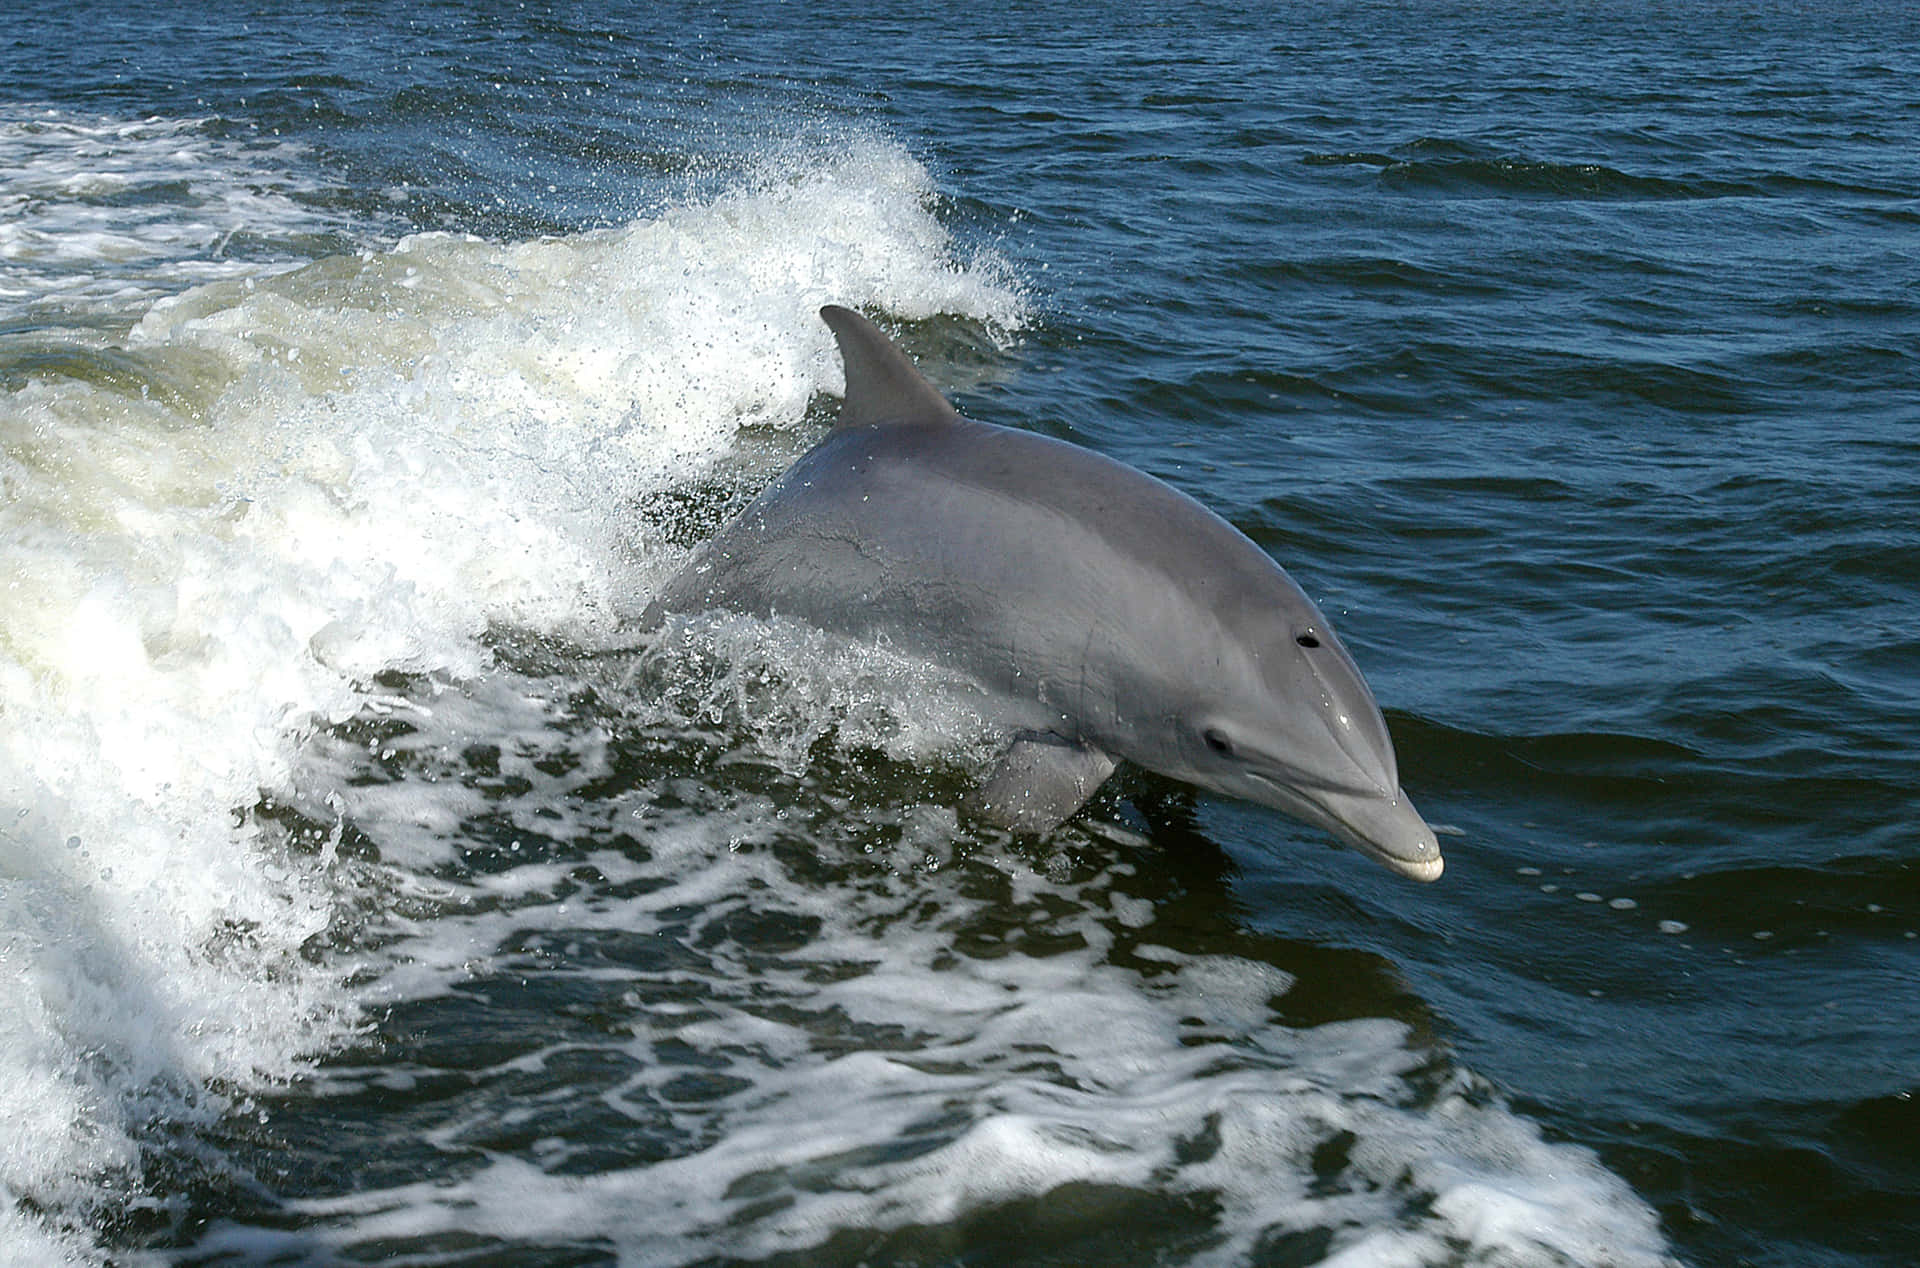 Explore the amazing ocean with a loving dolphin